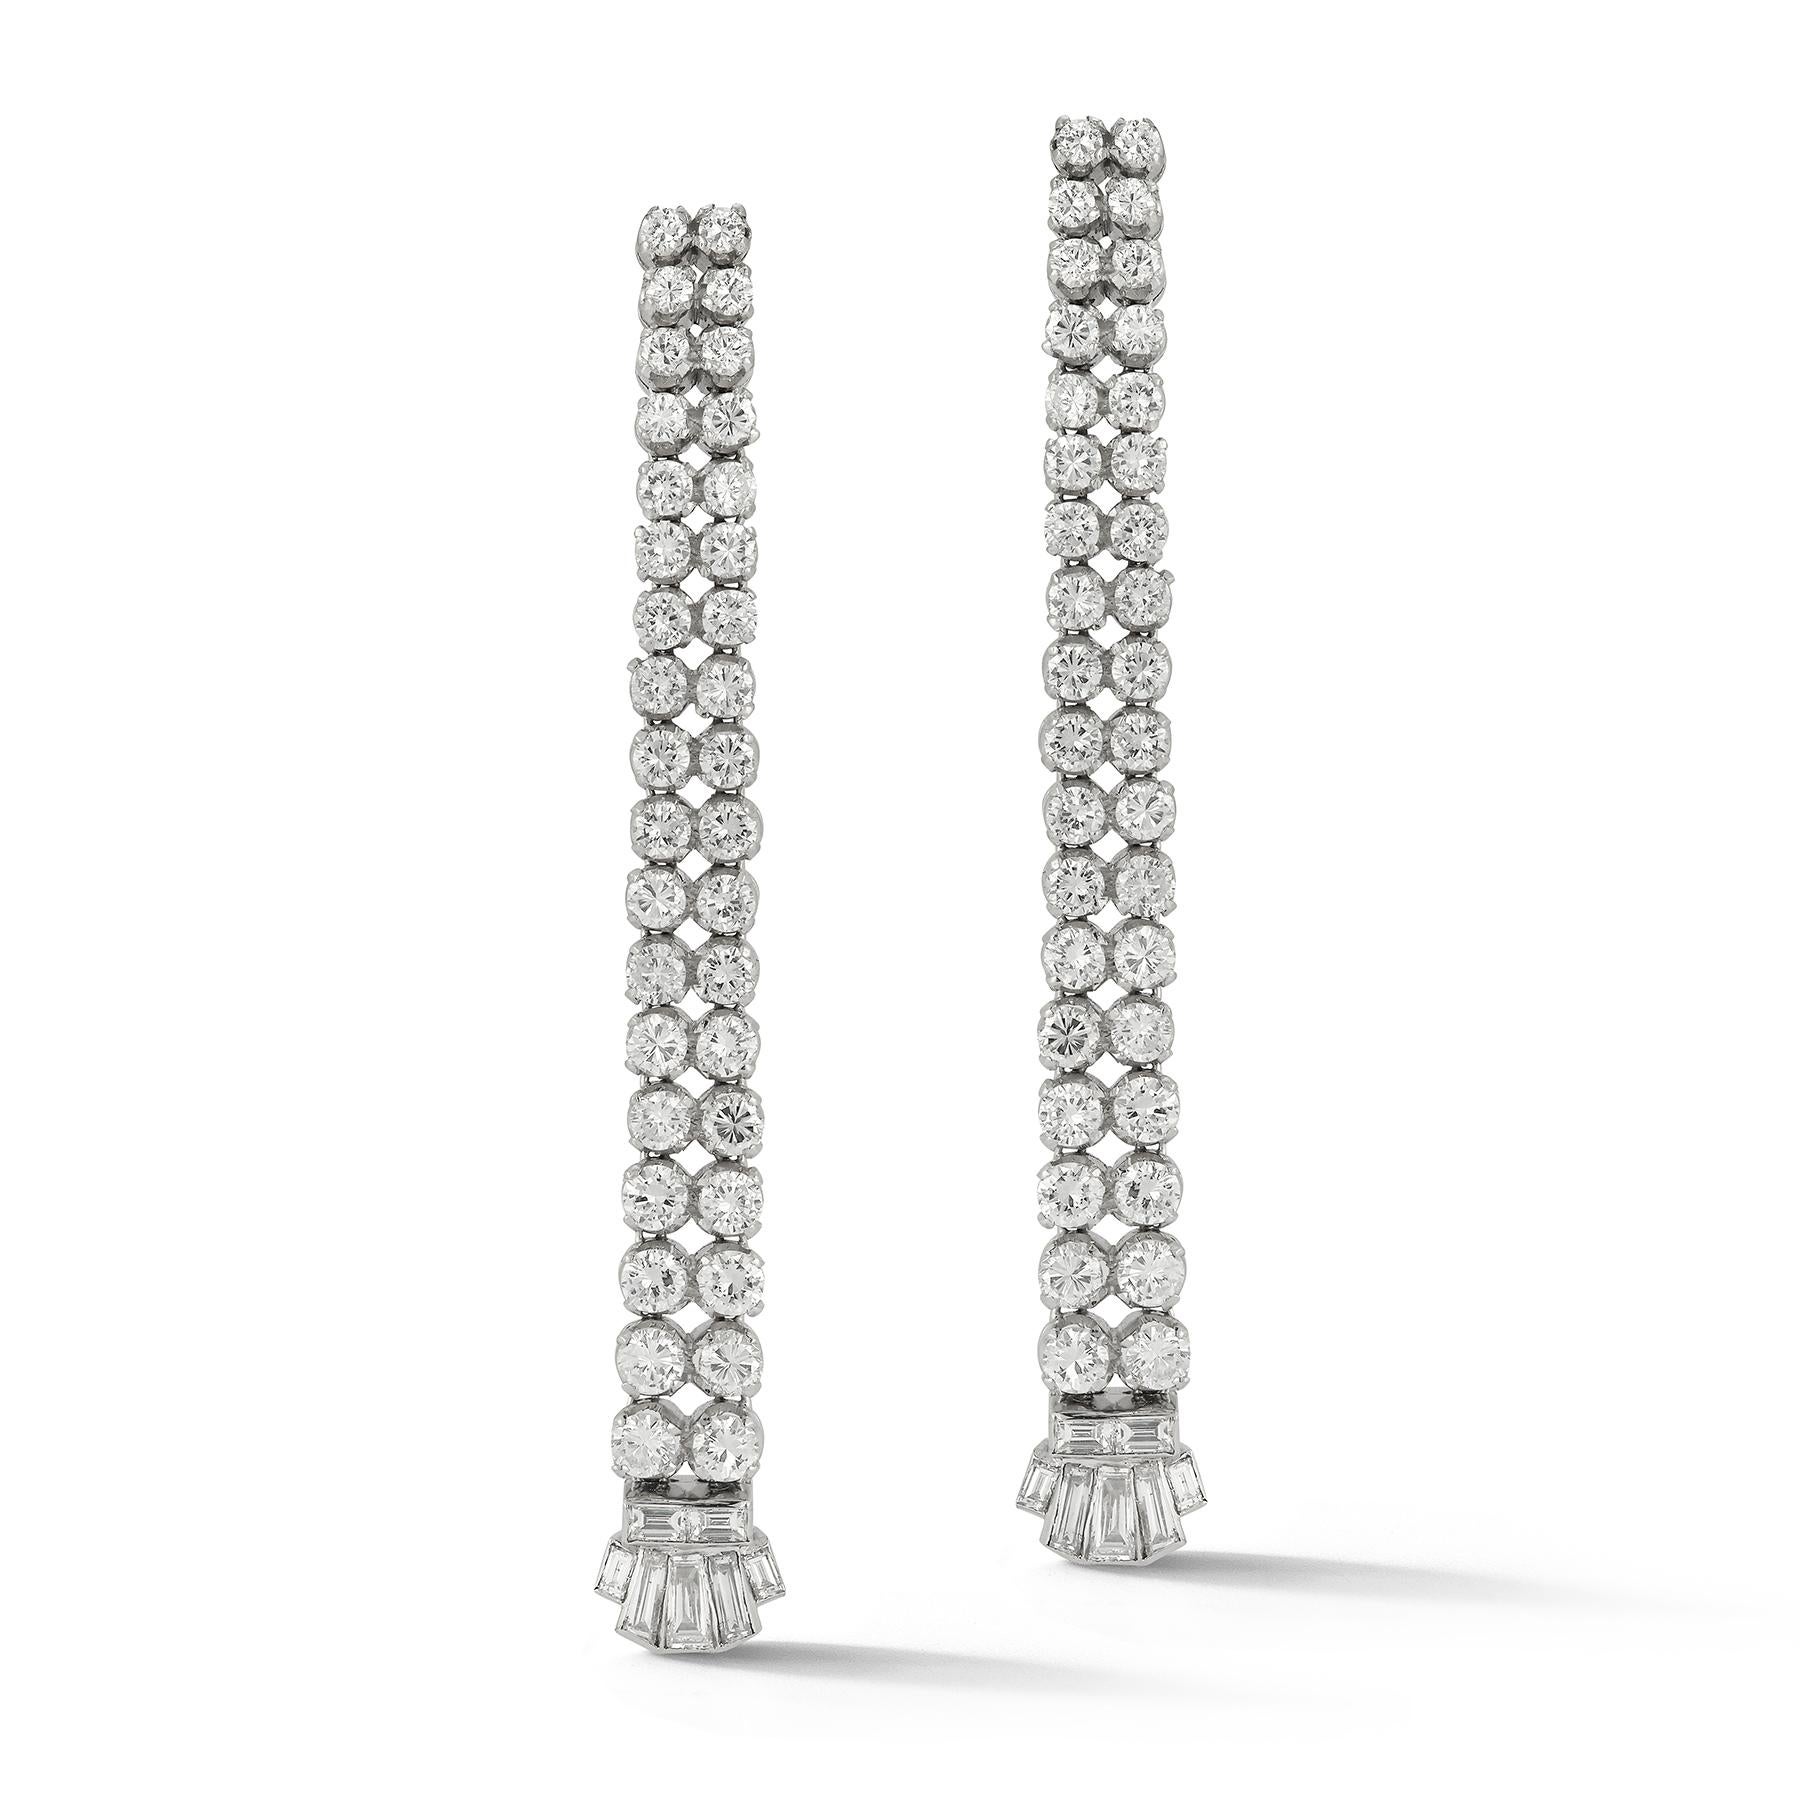 Art Deco Diamond Earrings

Diamond Two Row Graduated Linear Earrings

2 rows of  72 round cut diamonds attached to 14 baguette cut diamond drops set in platinum

Approximately 5 carats of diamonds

Measurements: 3